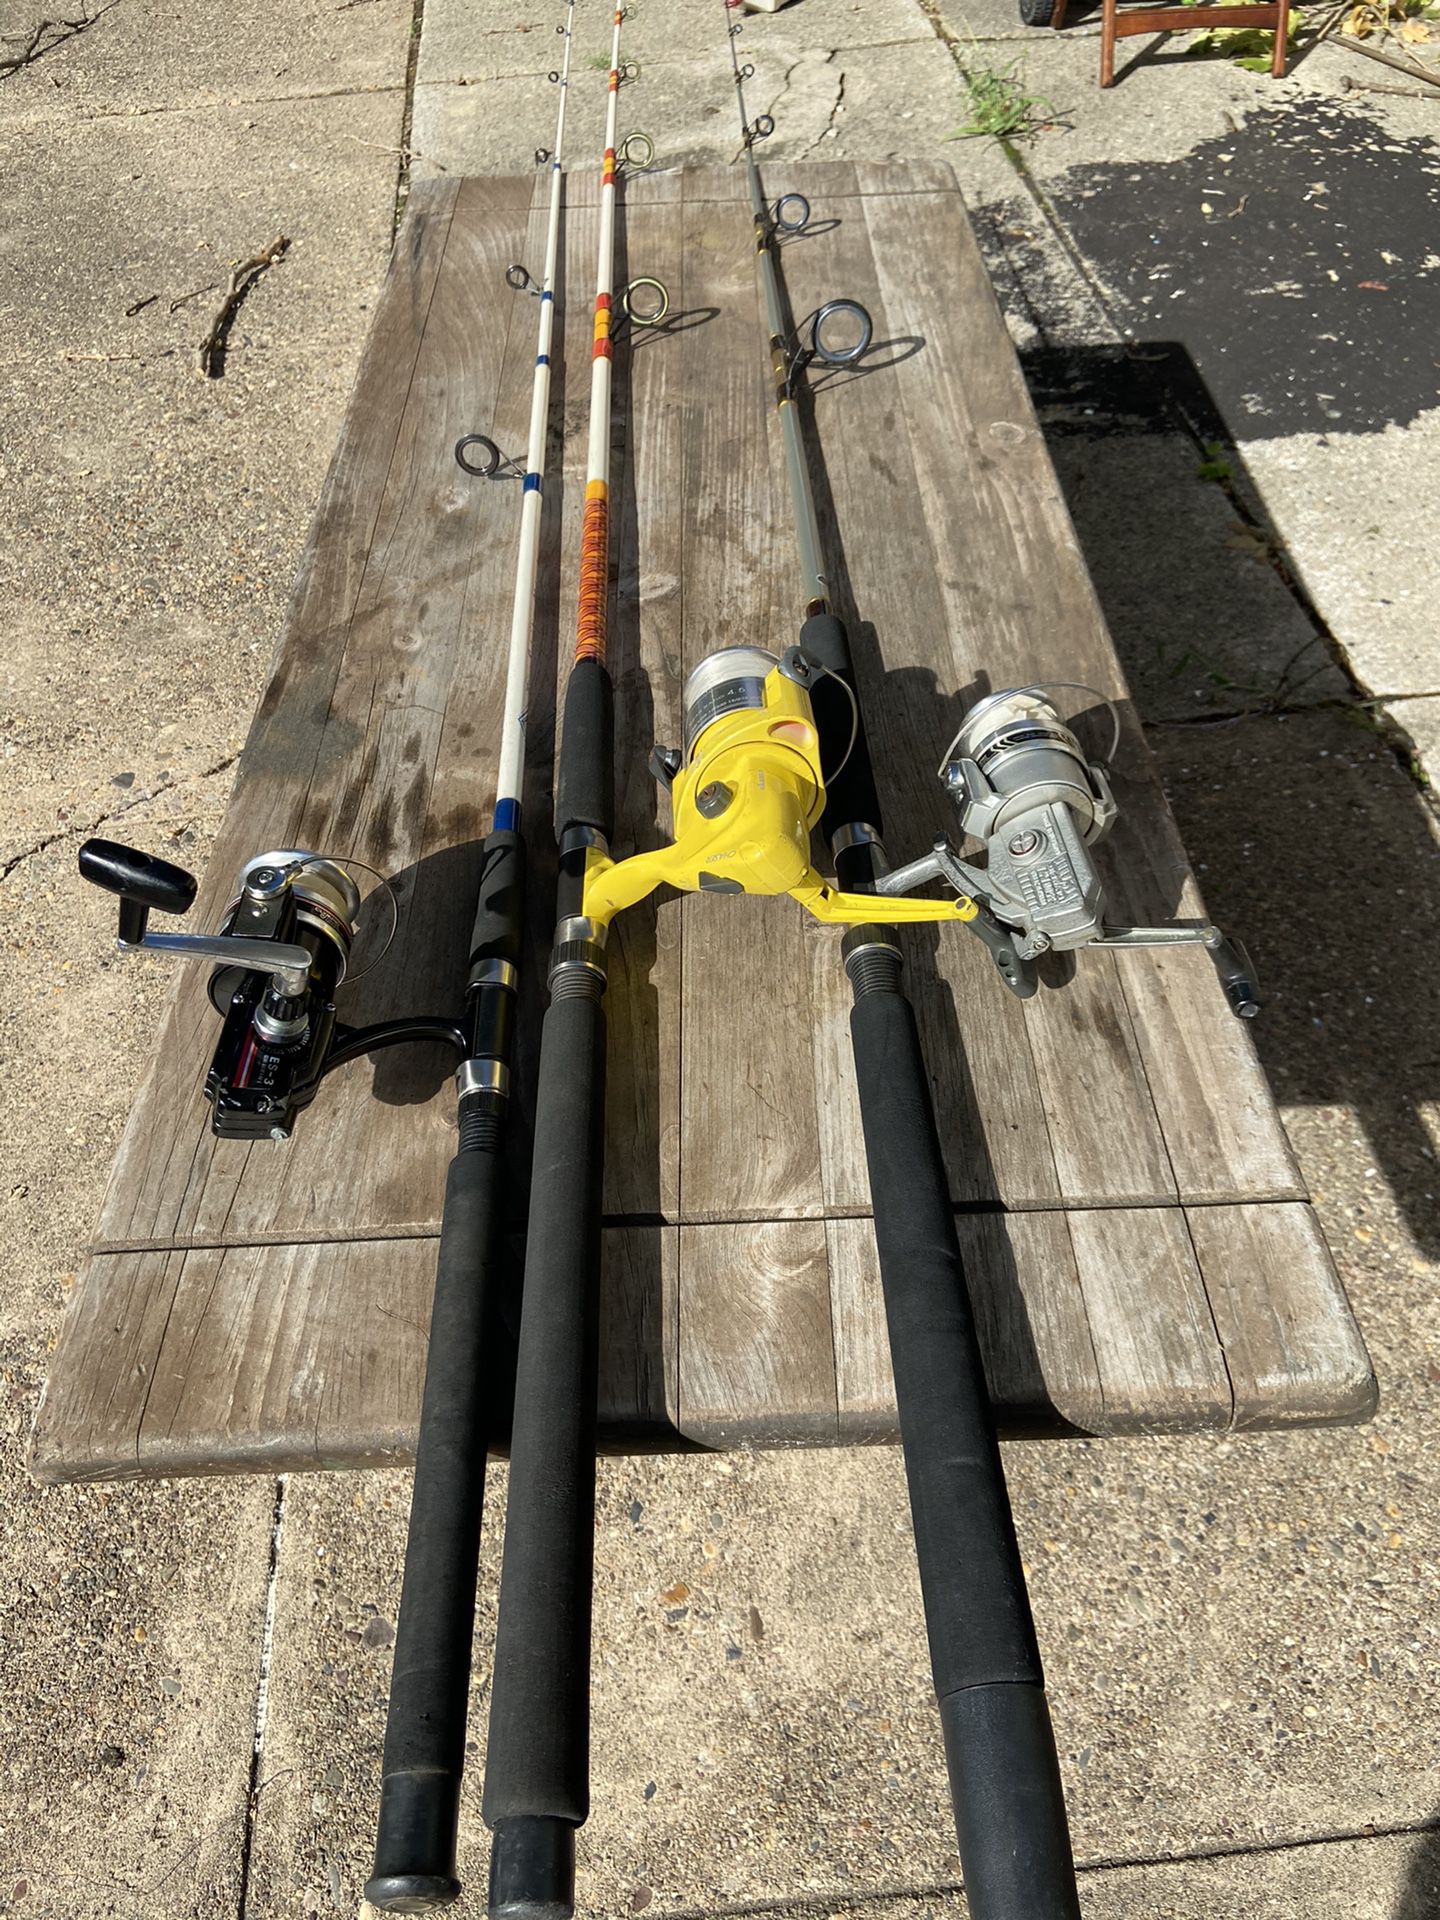 Various types of fsalt water fishing rods, reels and lines combos. $50 each.